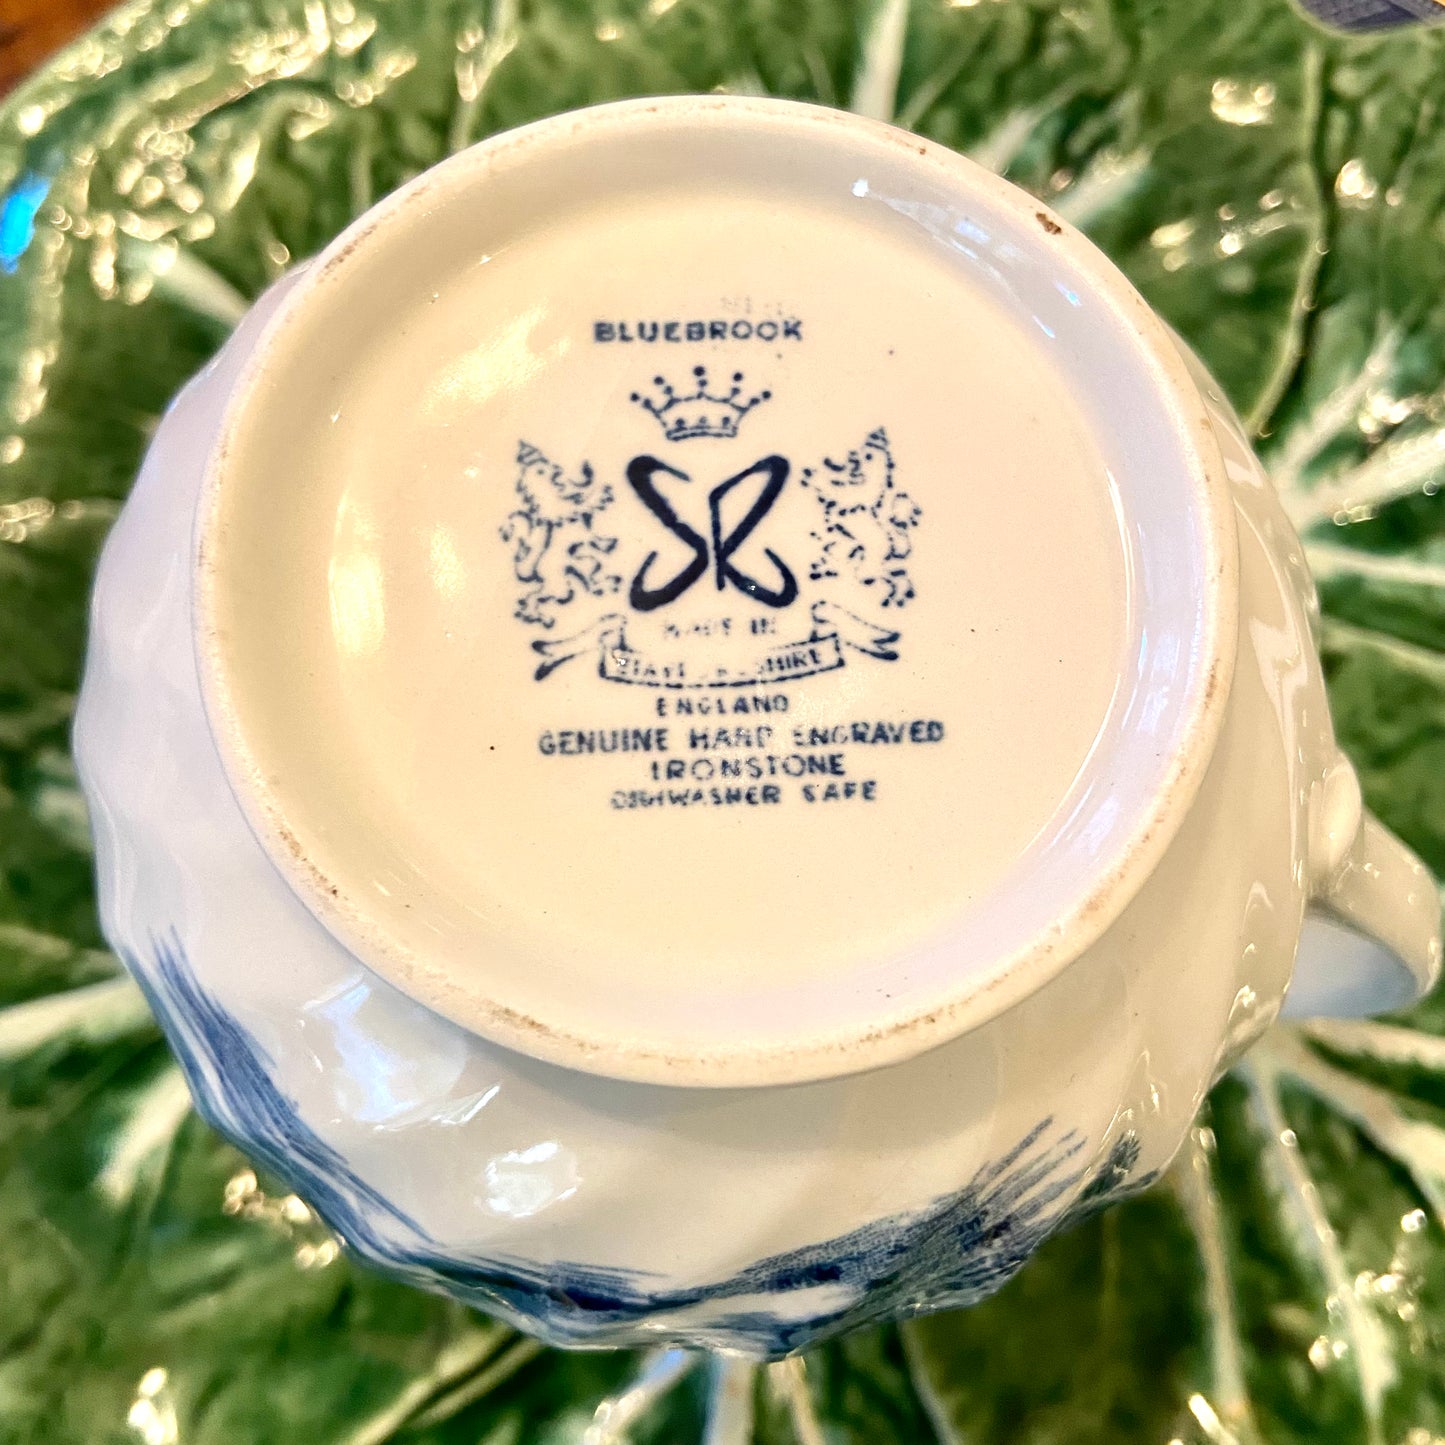 Vintage blue & white creamer by Bluebrook by Staffordshire, England